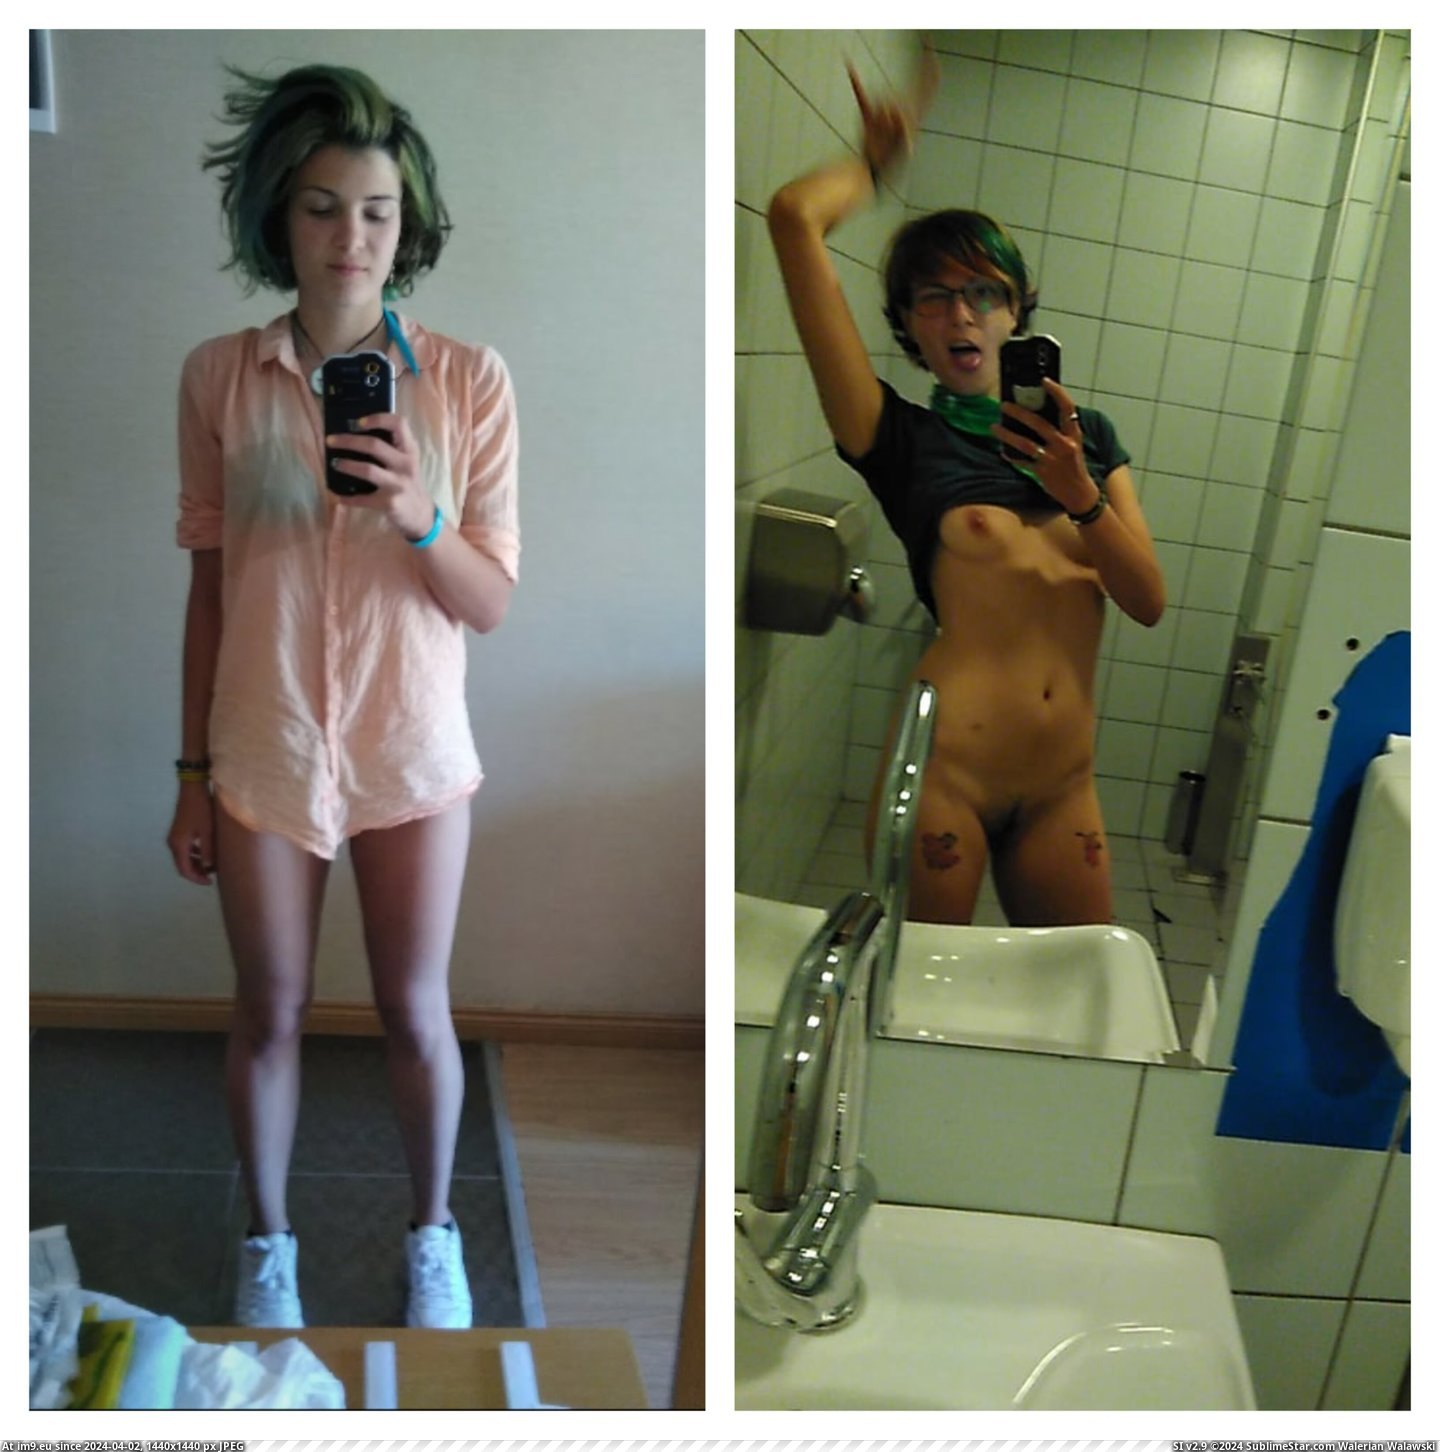 #Tits #Pussy #Dressed #Collage #Onoff #Clothed #Undressed #Unclothed Valentinaon_off Pic. (Image of album Instant Upload))